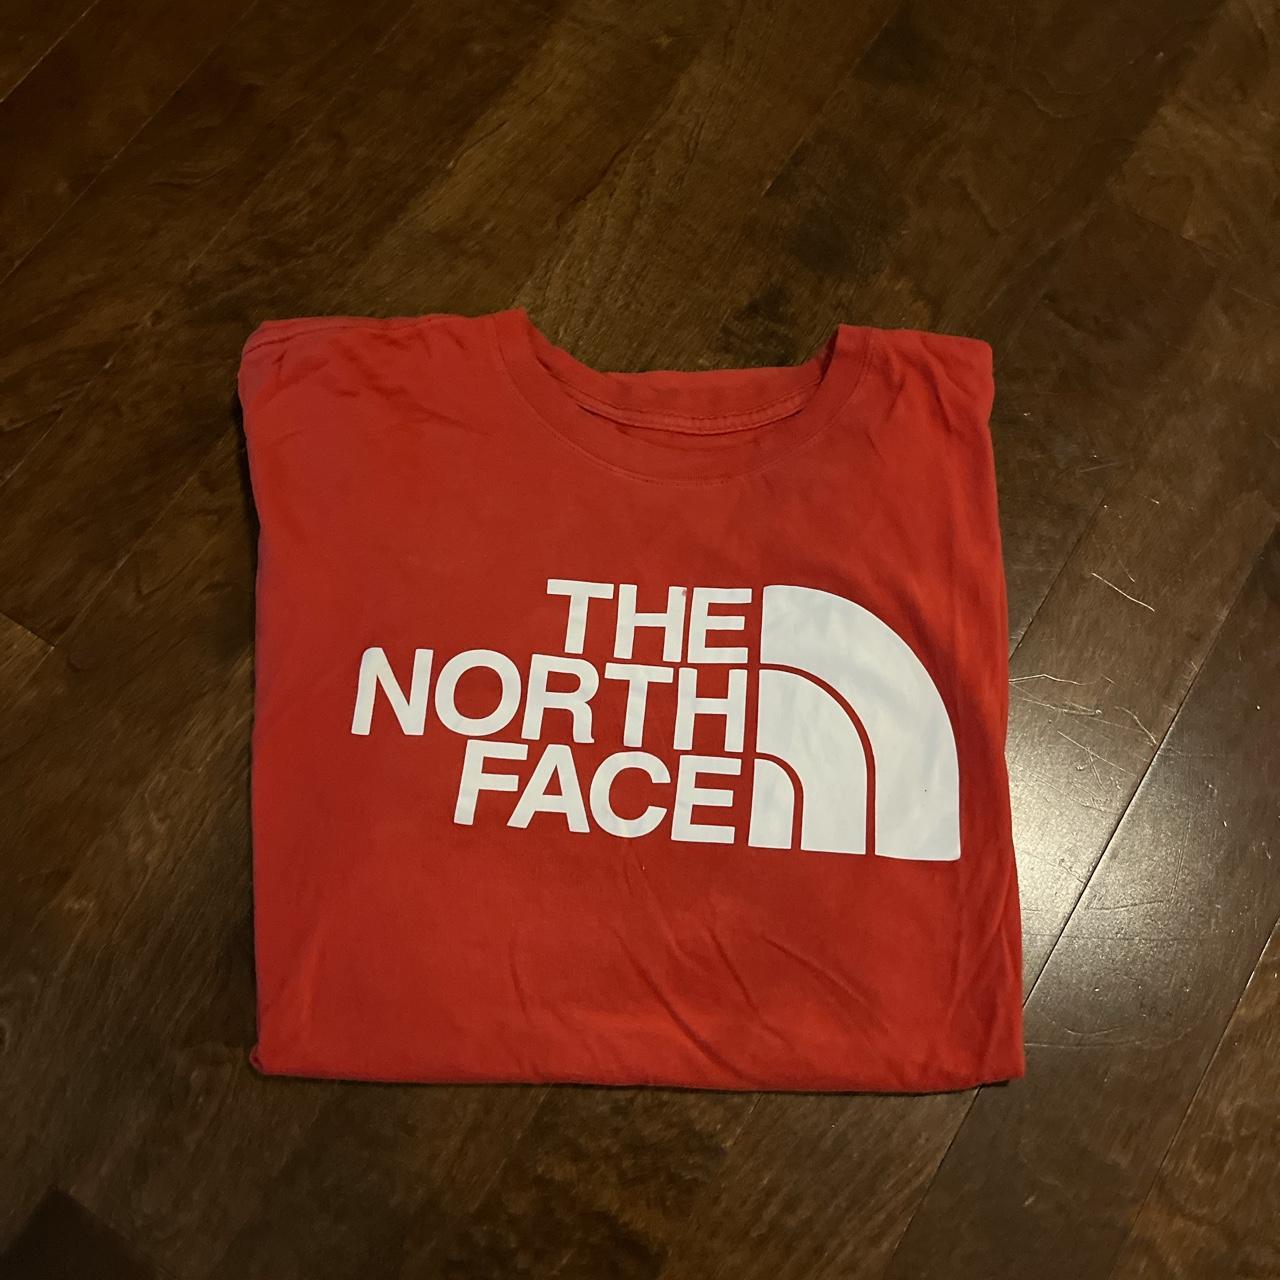 The North Face Men's Red T-shirt | Depop